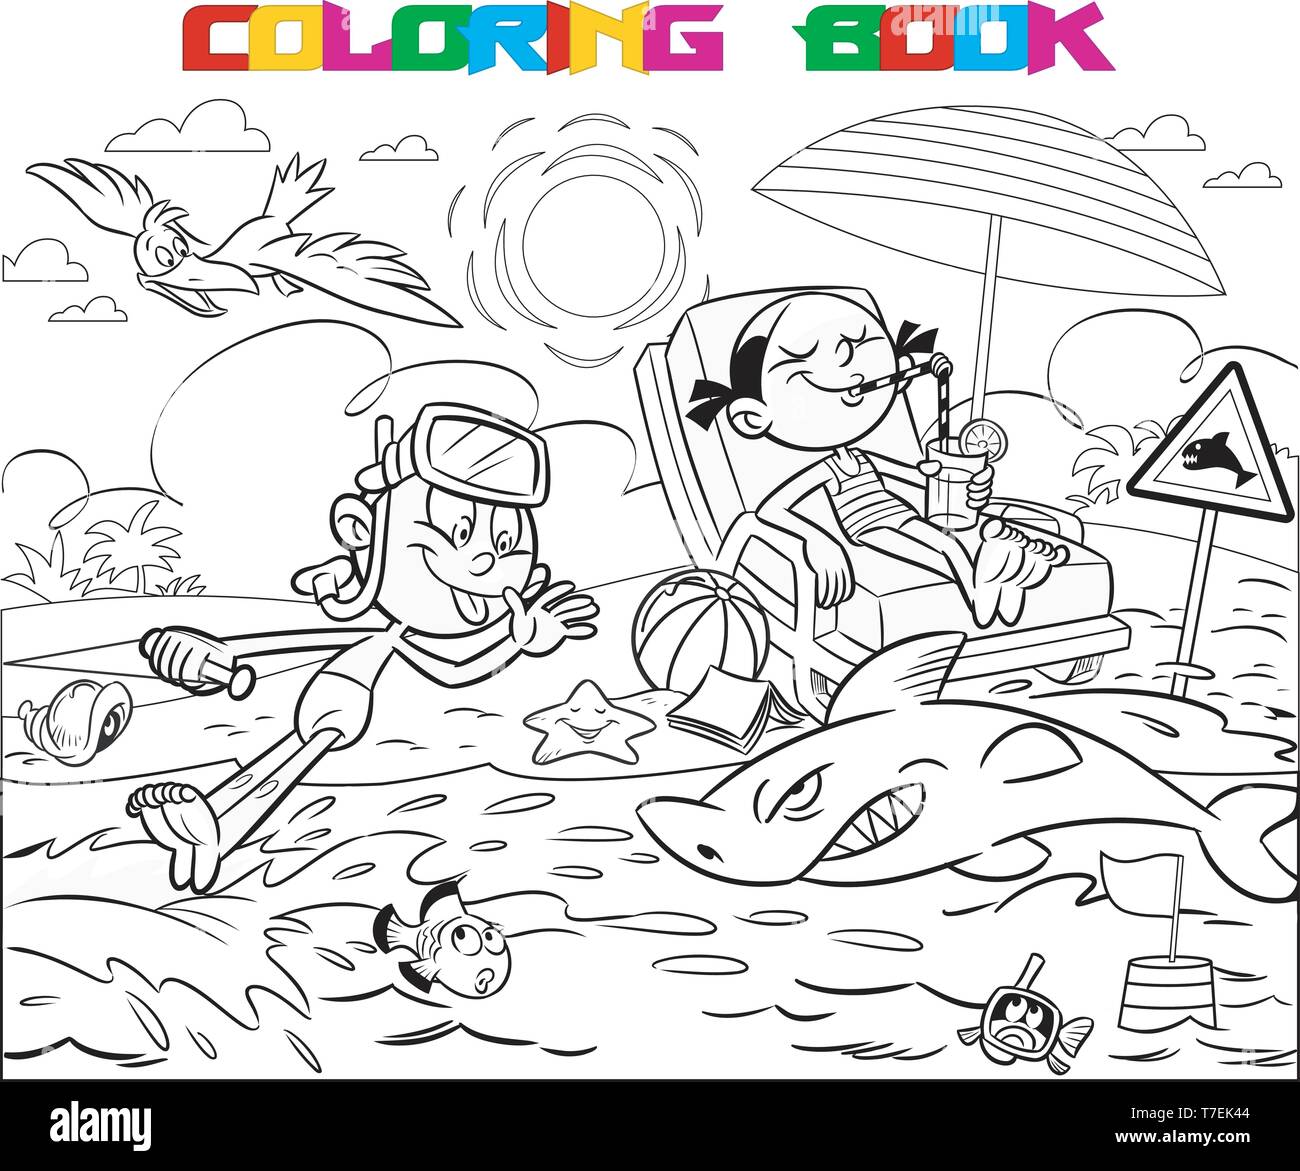 Children relaxing on the beach. Girl sunbathing in chaise lounge. She drinks juice. The boy has been diving. Black outline for a coloring book Stock Vector